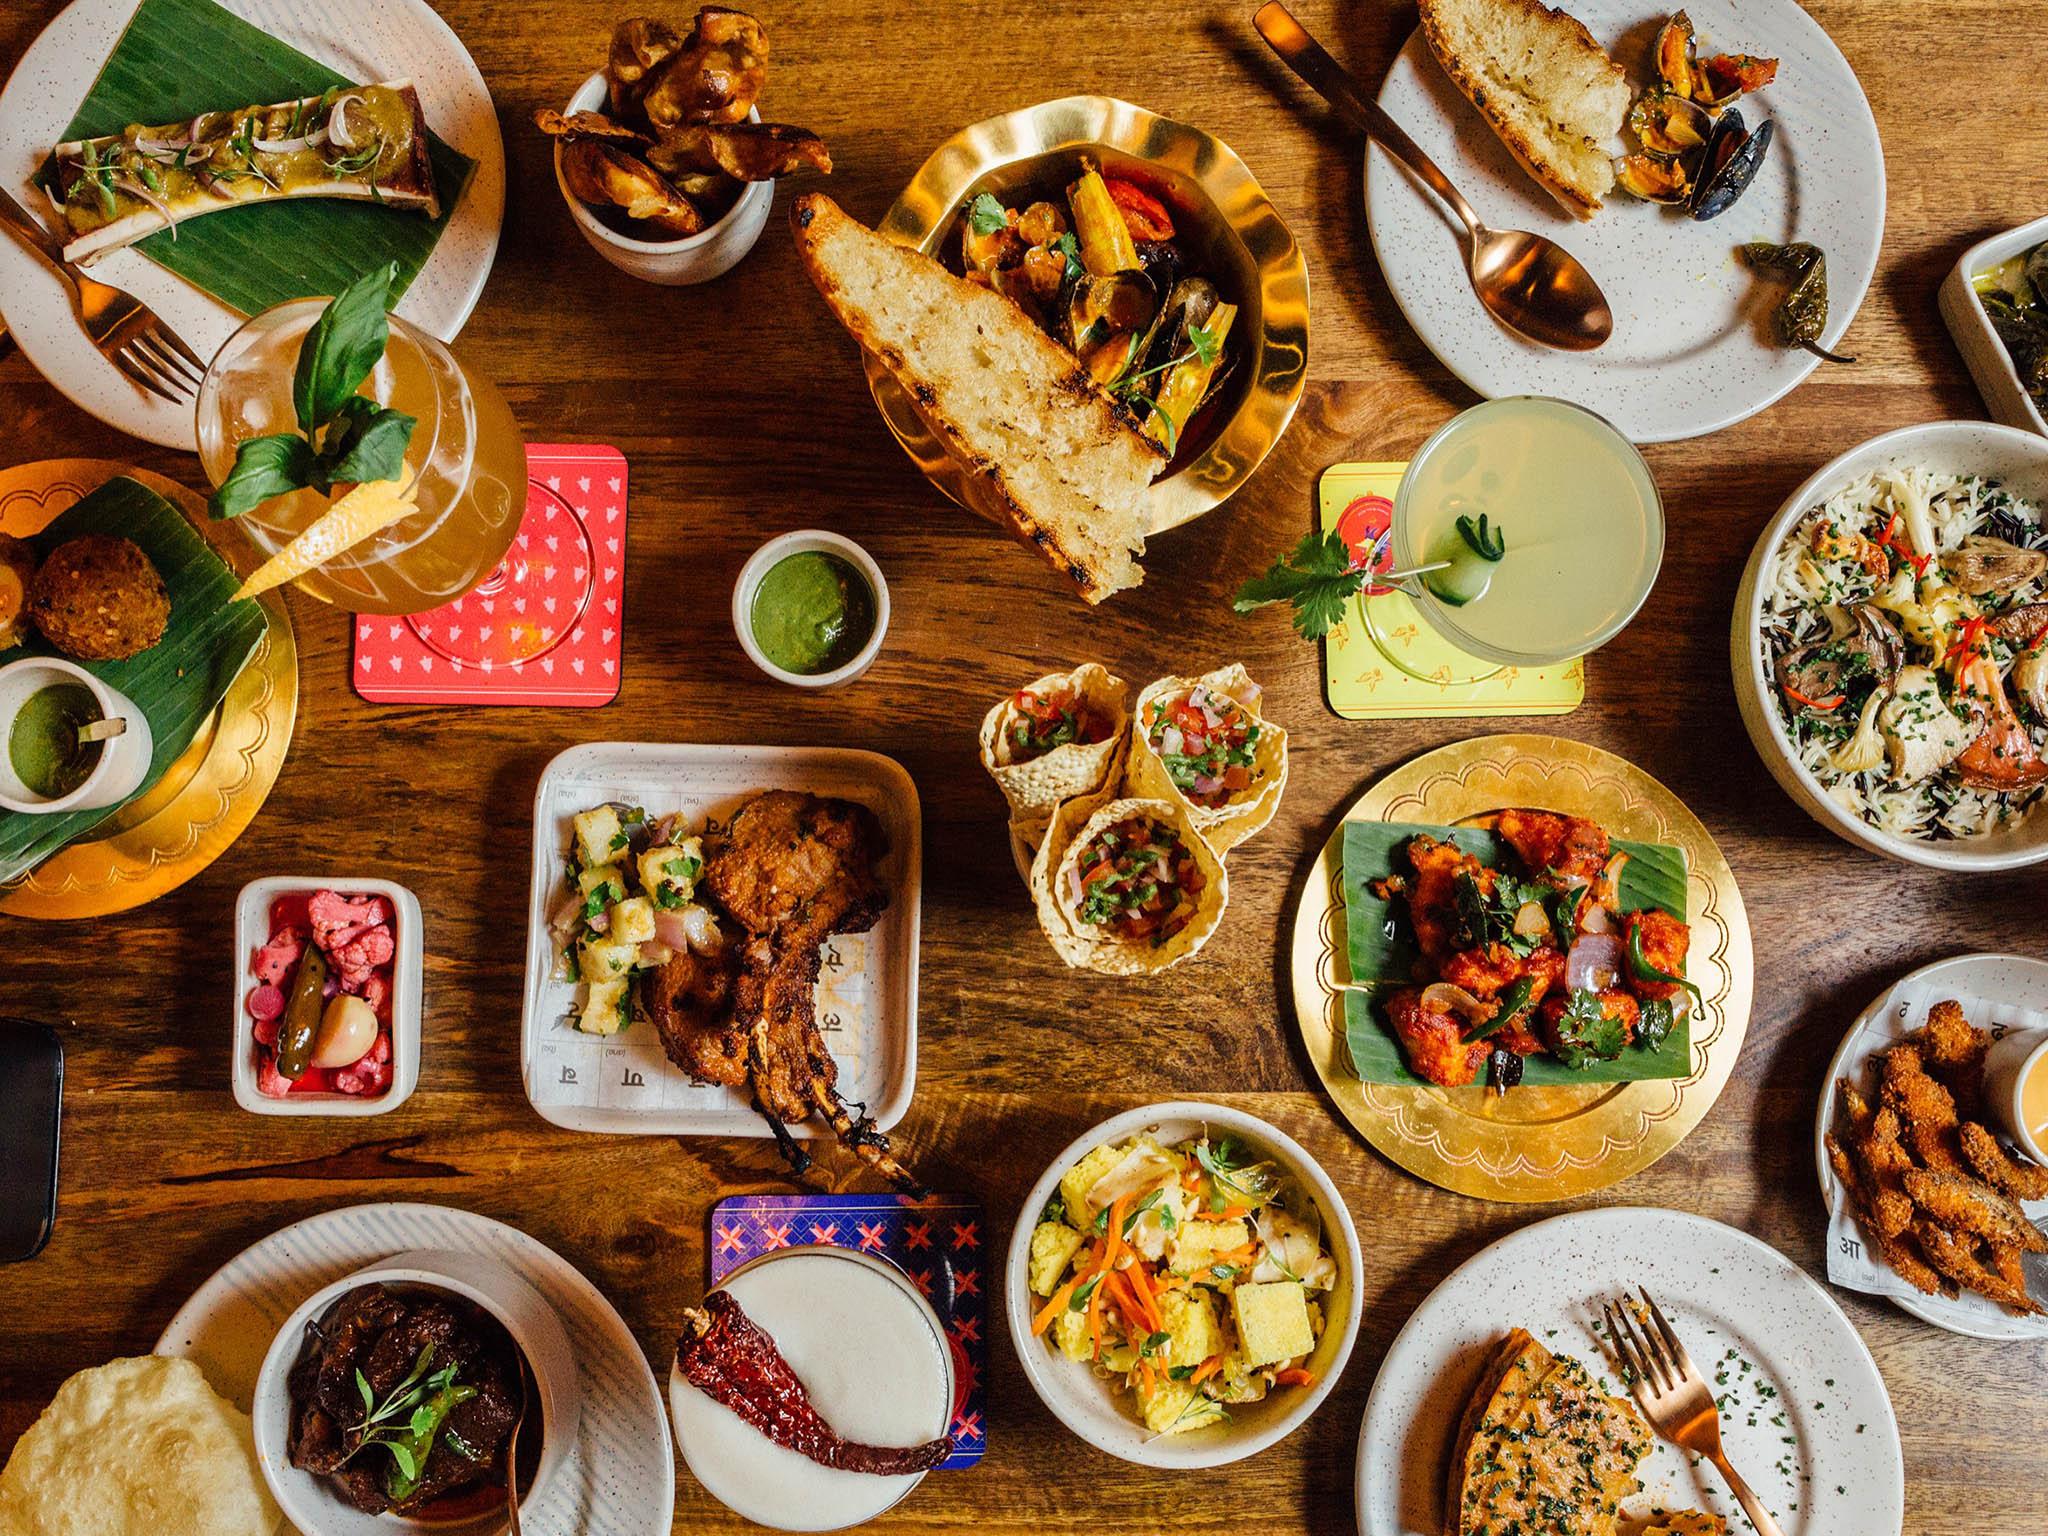 Specialising in small plates for sharing, Talli Joe's food is bright and innovative